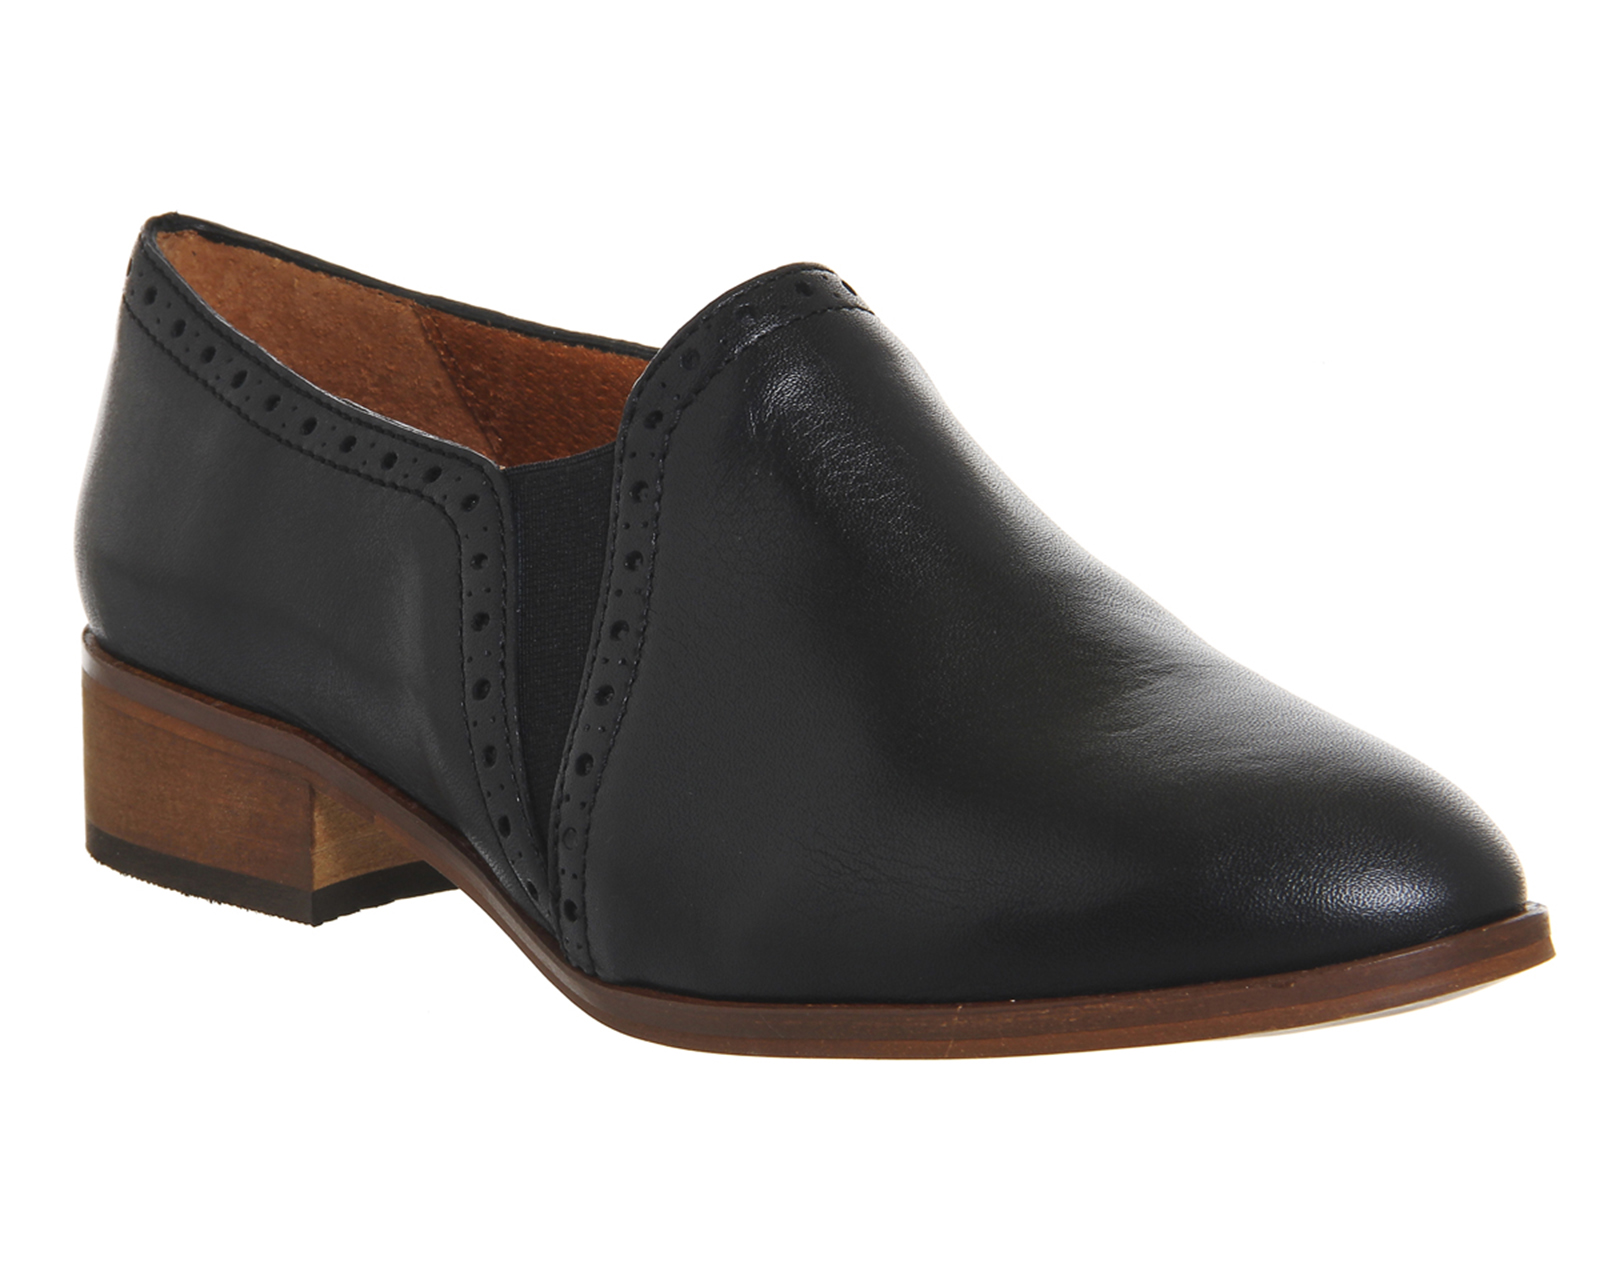 OFFICEPace Western ShoesBlack Leather